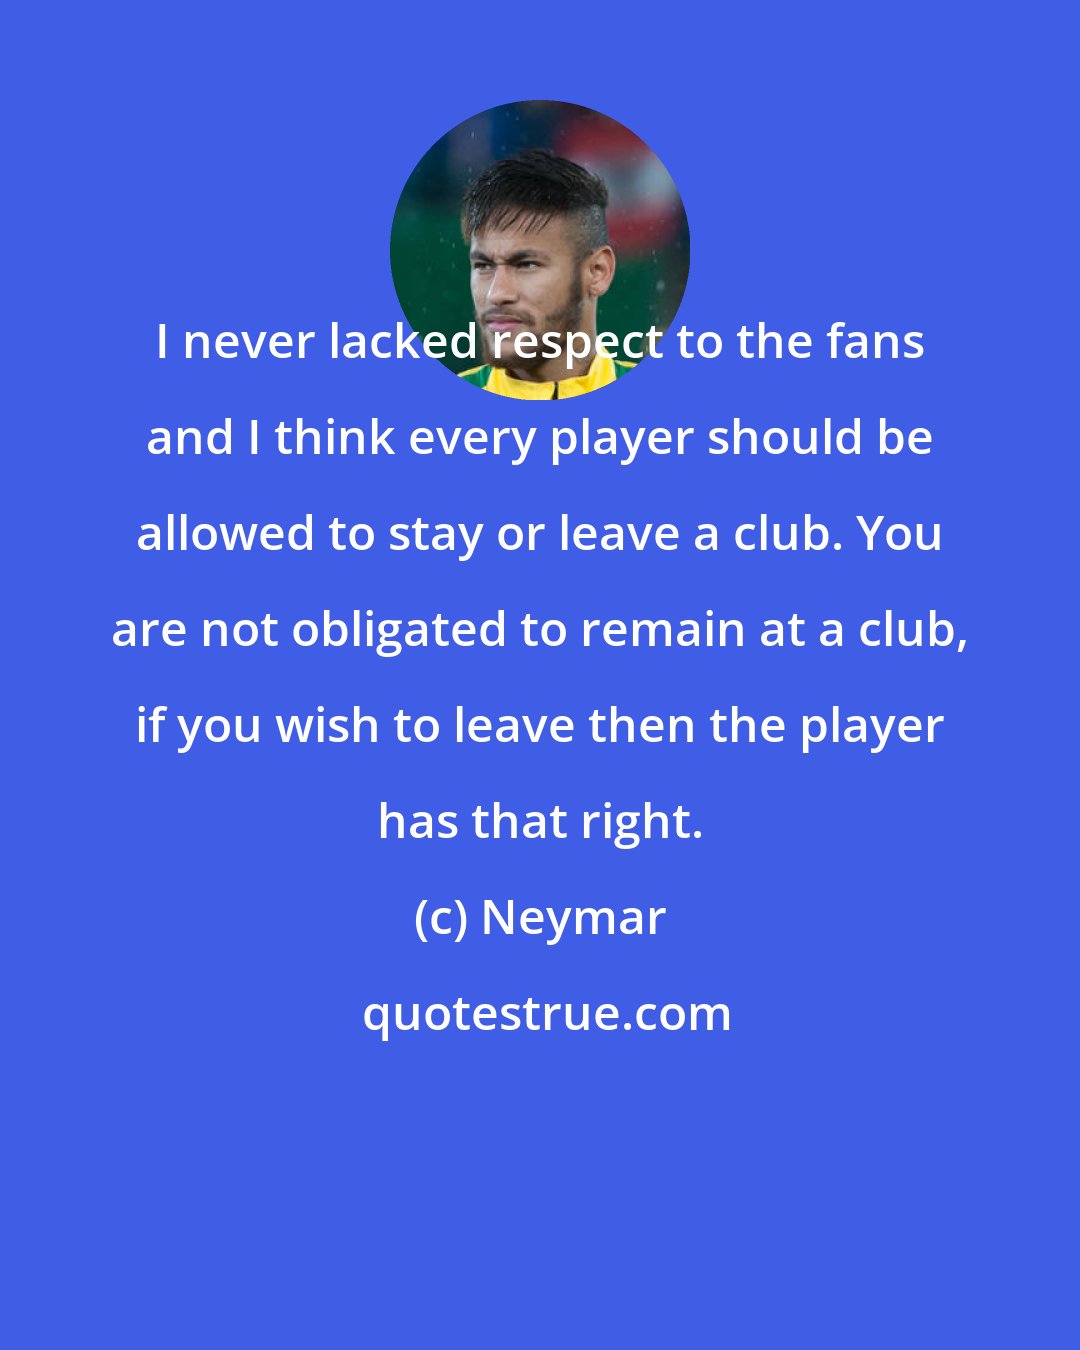 Neymar: I never lacked respect to the fans and I think every player should be allowed to stay or leave a club. You are not obligated to remain at a club, if you wish to leave then the player has that right.